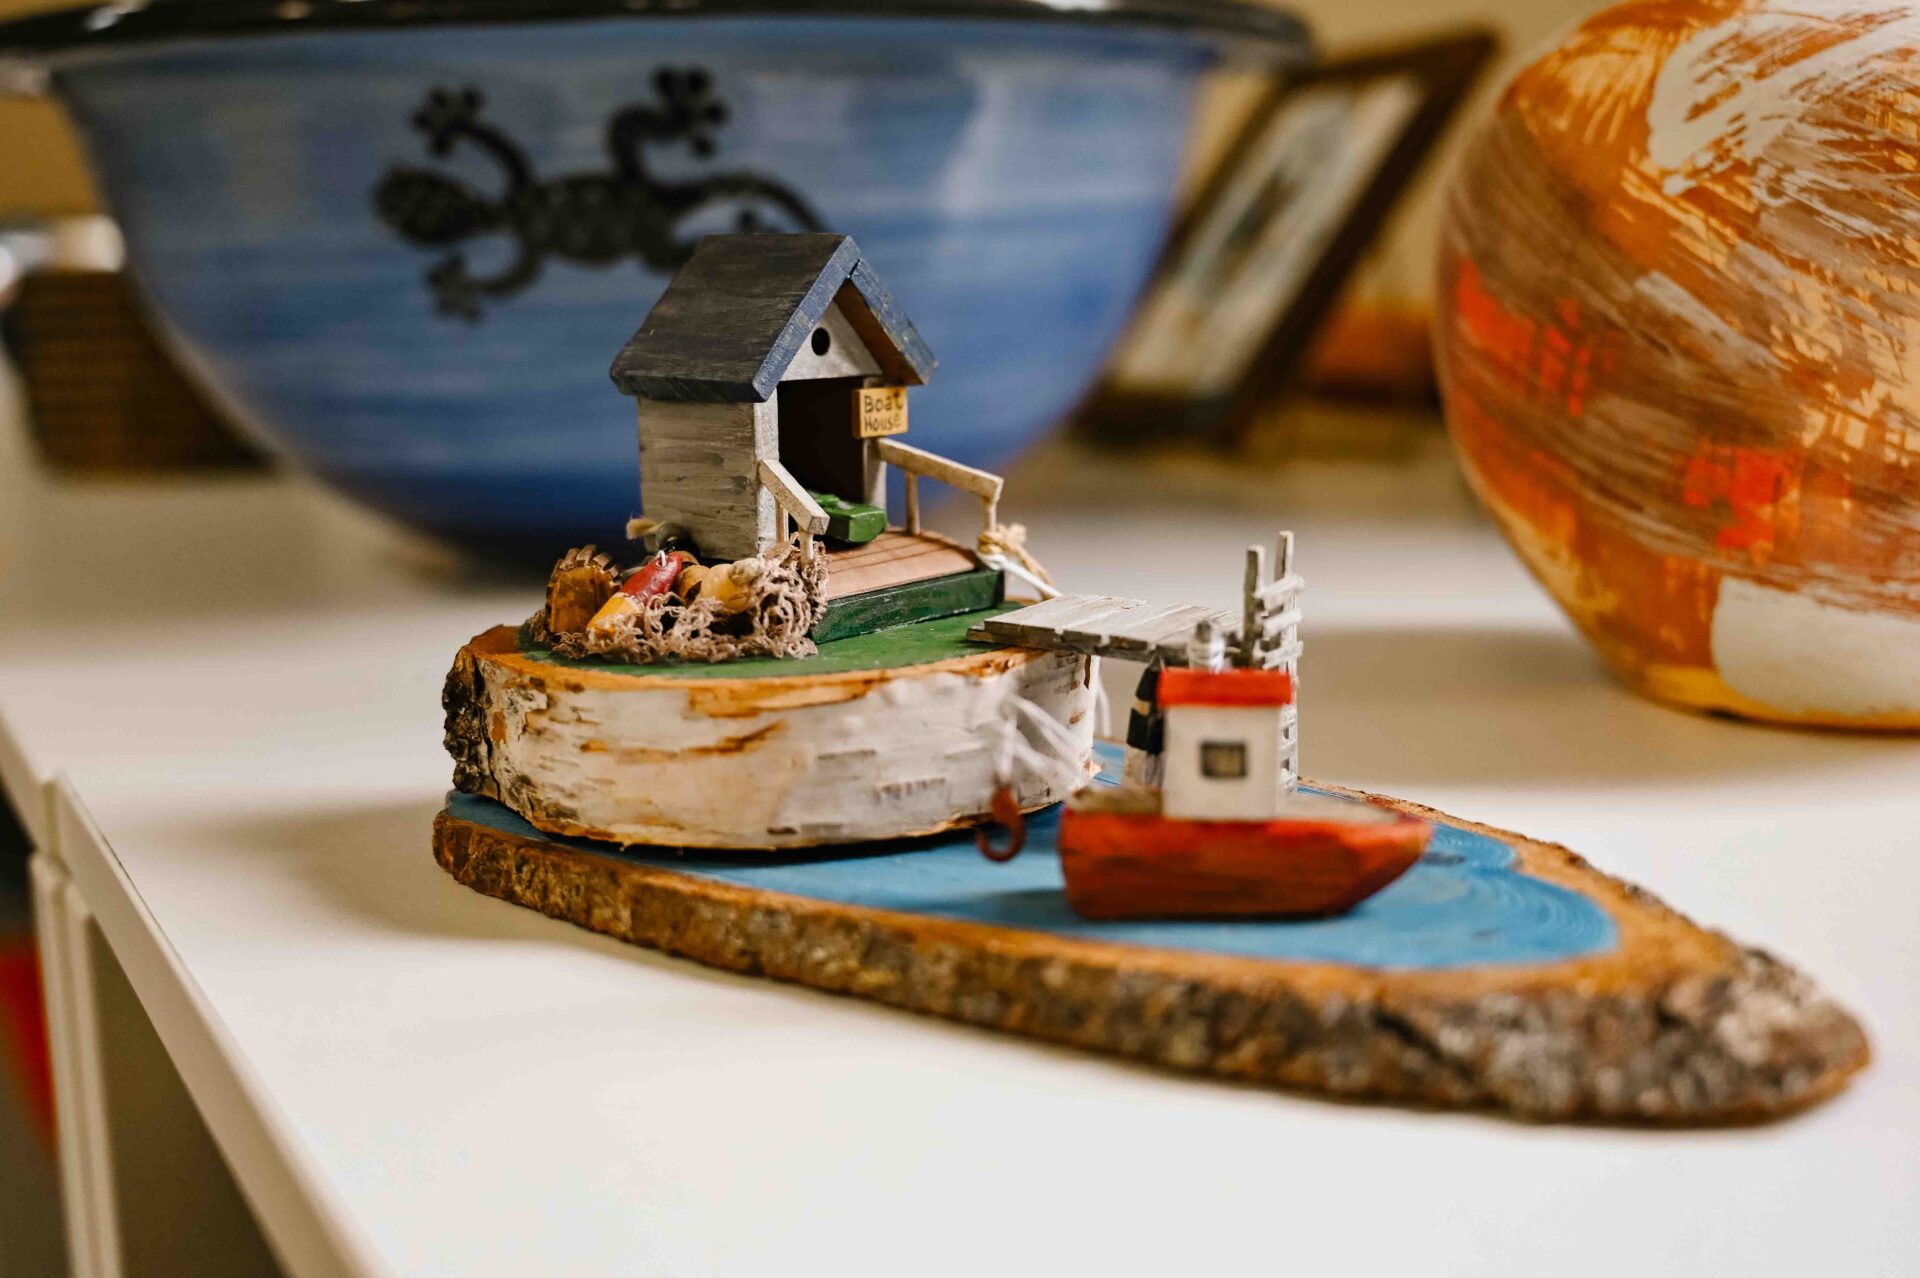 close up of a small handmade wooden souvenir of a boat house and a fishing boat